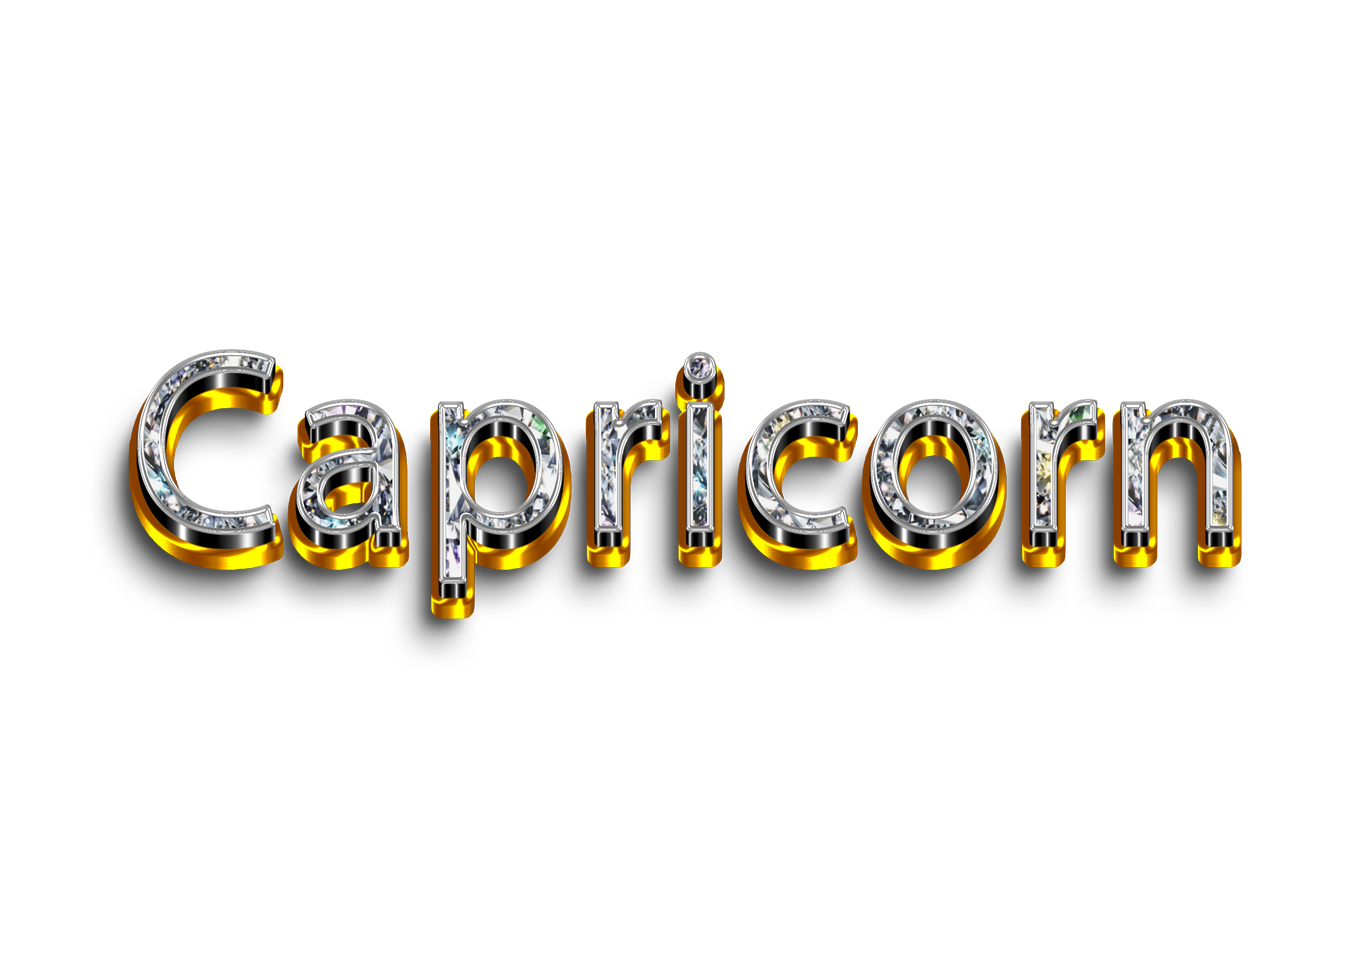 Capricorn png, word Capricorn png, Capricorn word png, Capricorn text png, Capricorn letters png, Capricorn word diamond gold text typography PNG images transparent background